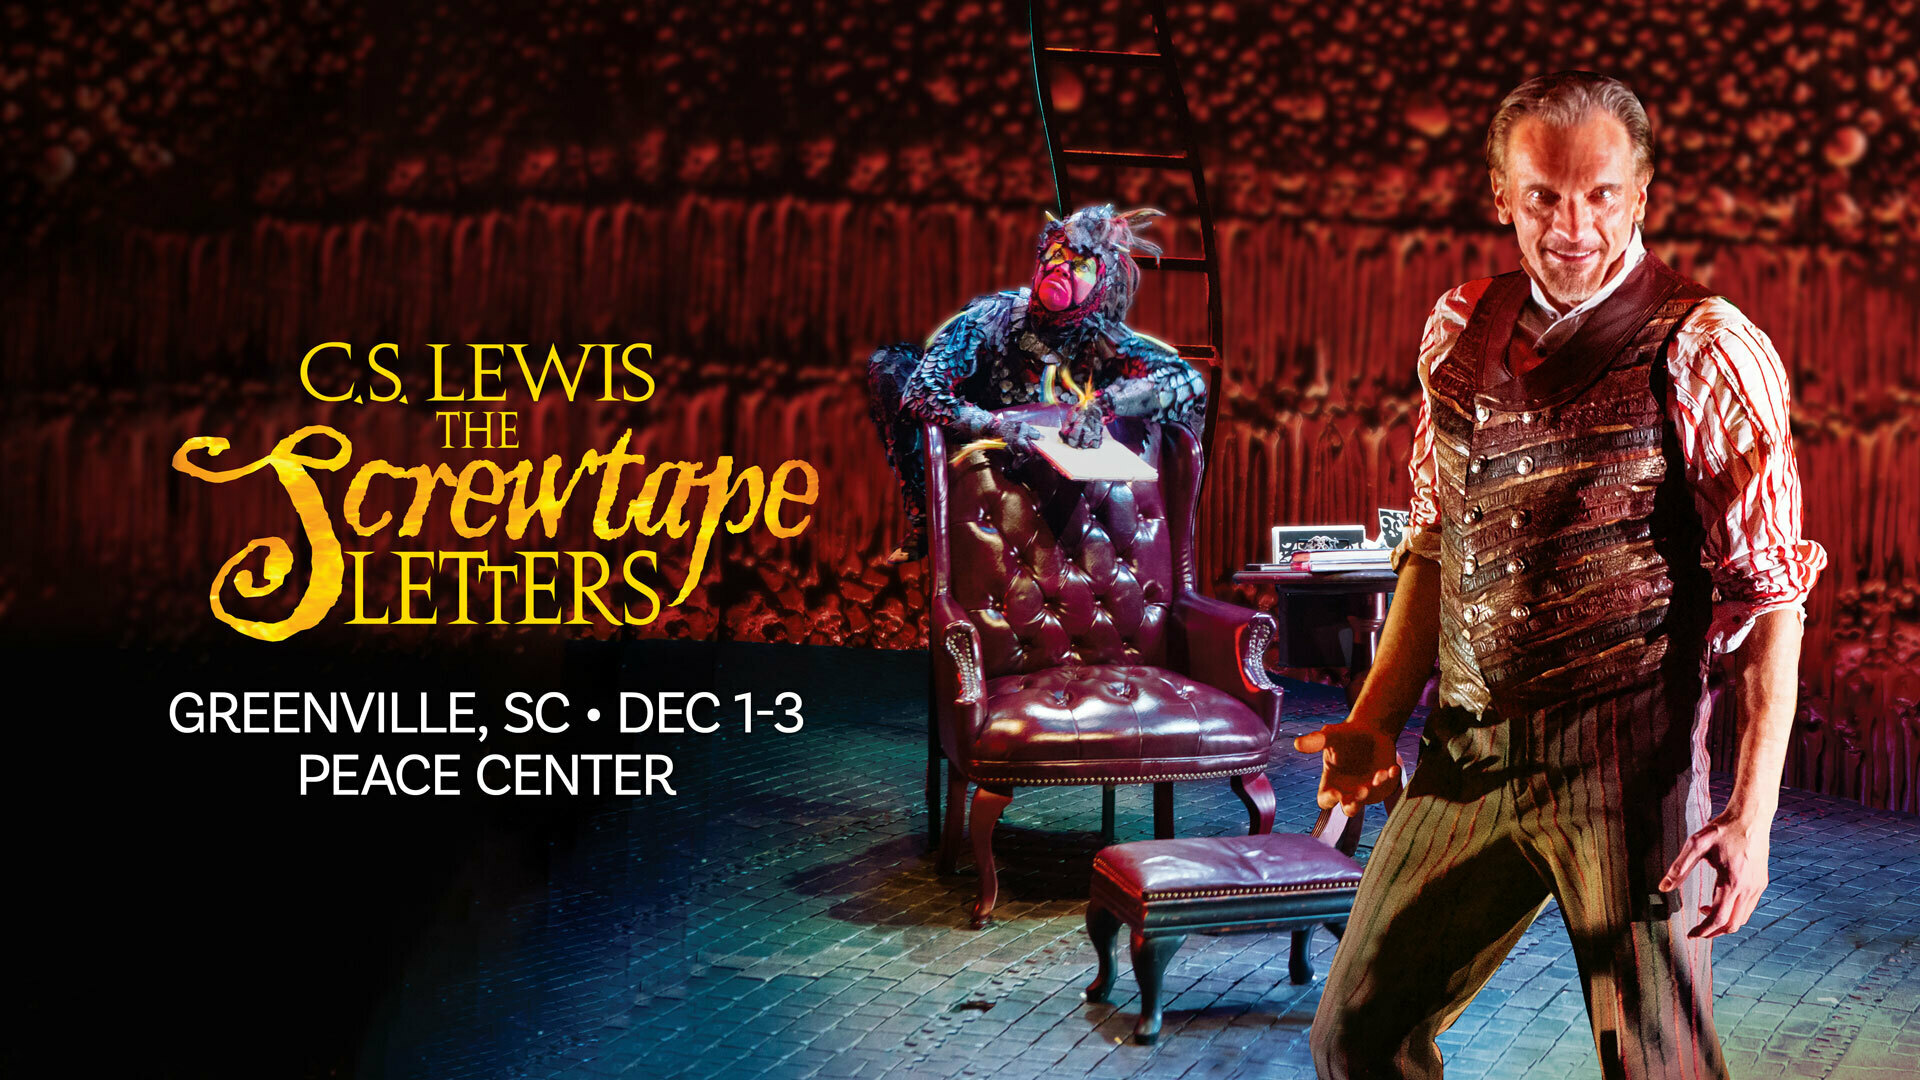 C.S. Lewis' The Screwtape Letters (Greenville, SC), Greenville, South Carolina, United States